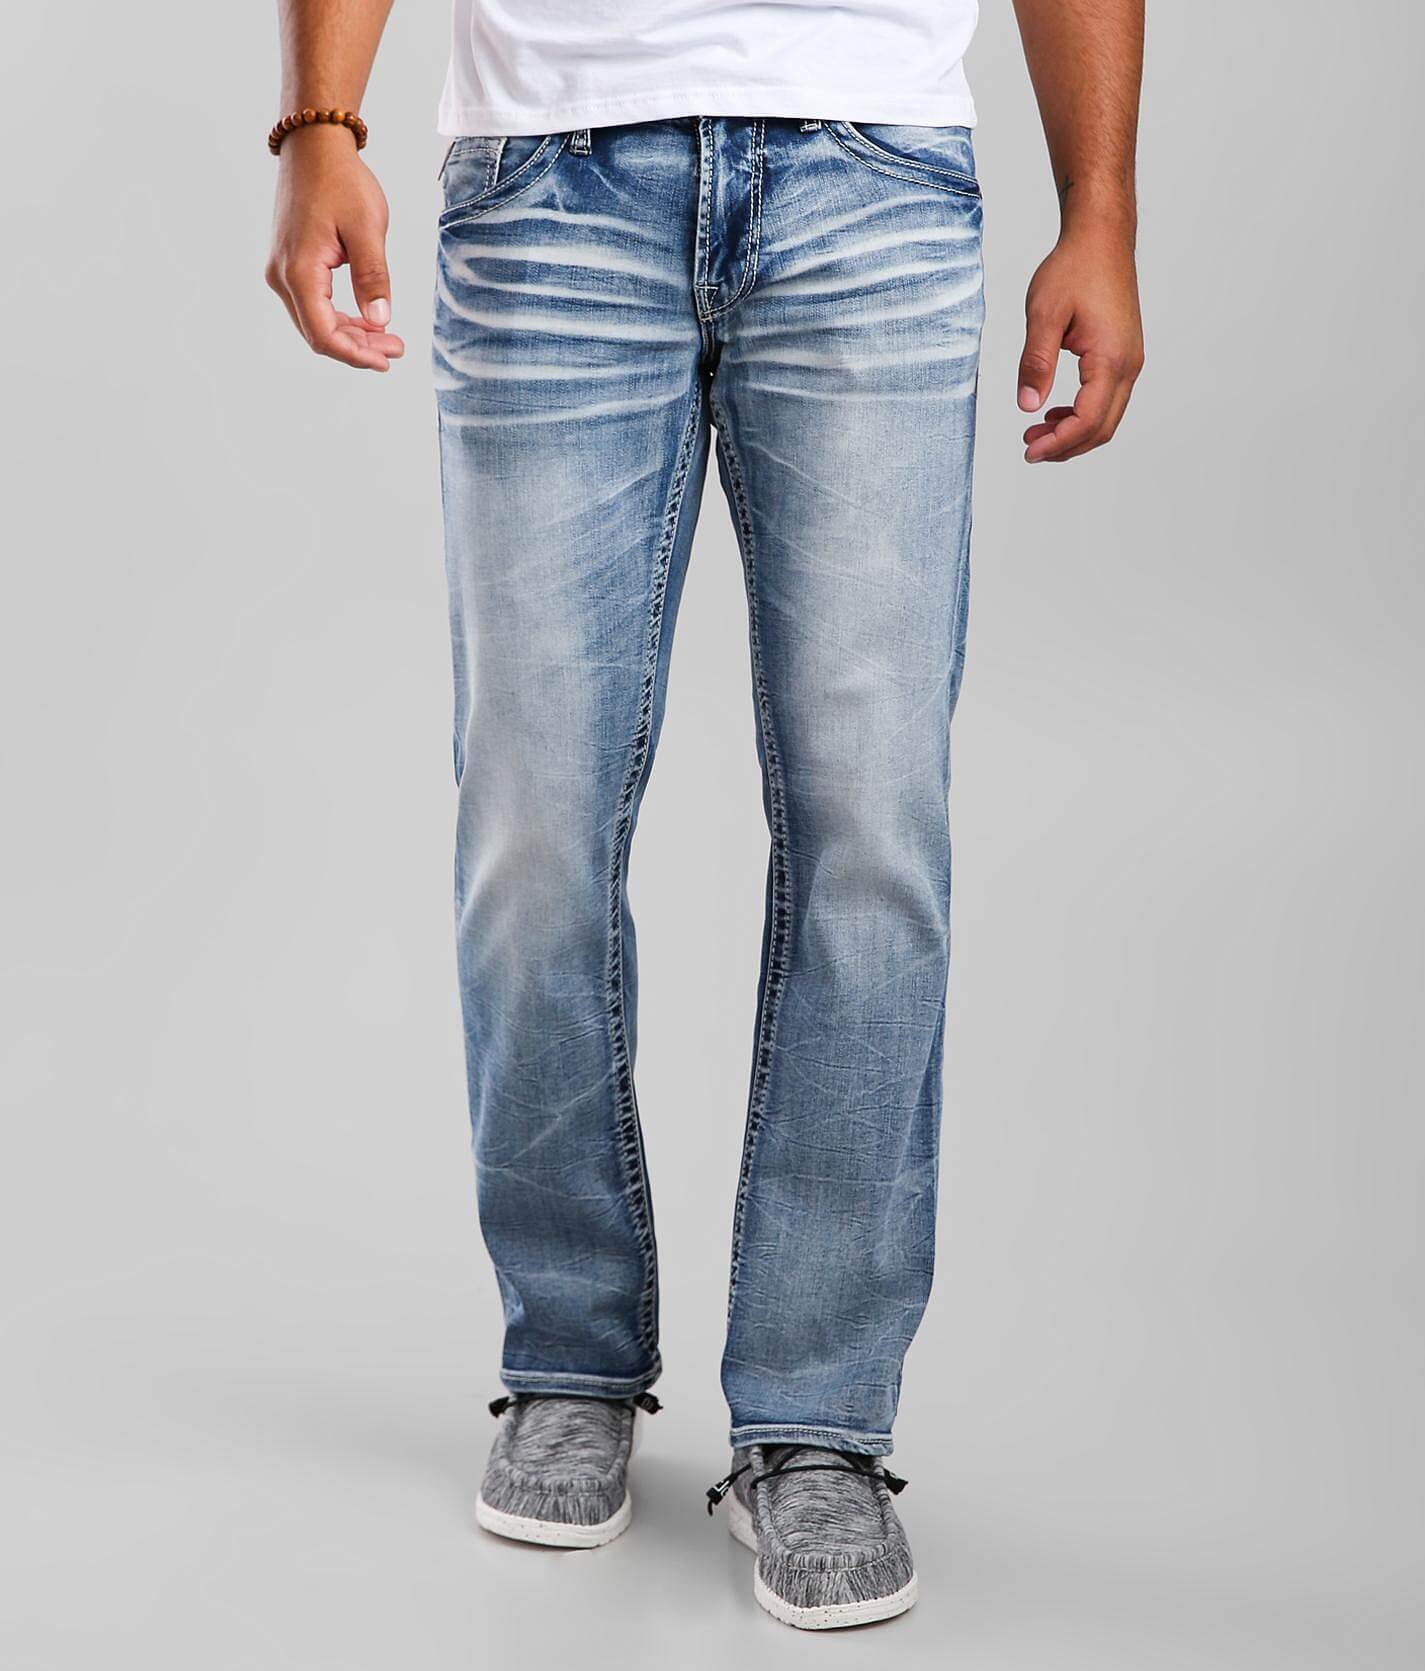 salvage supply co jeans